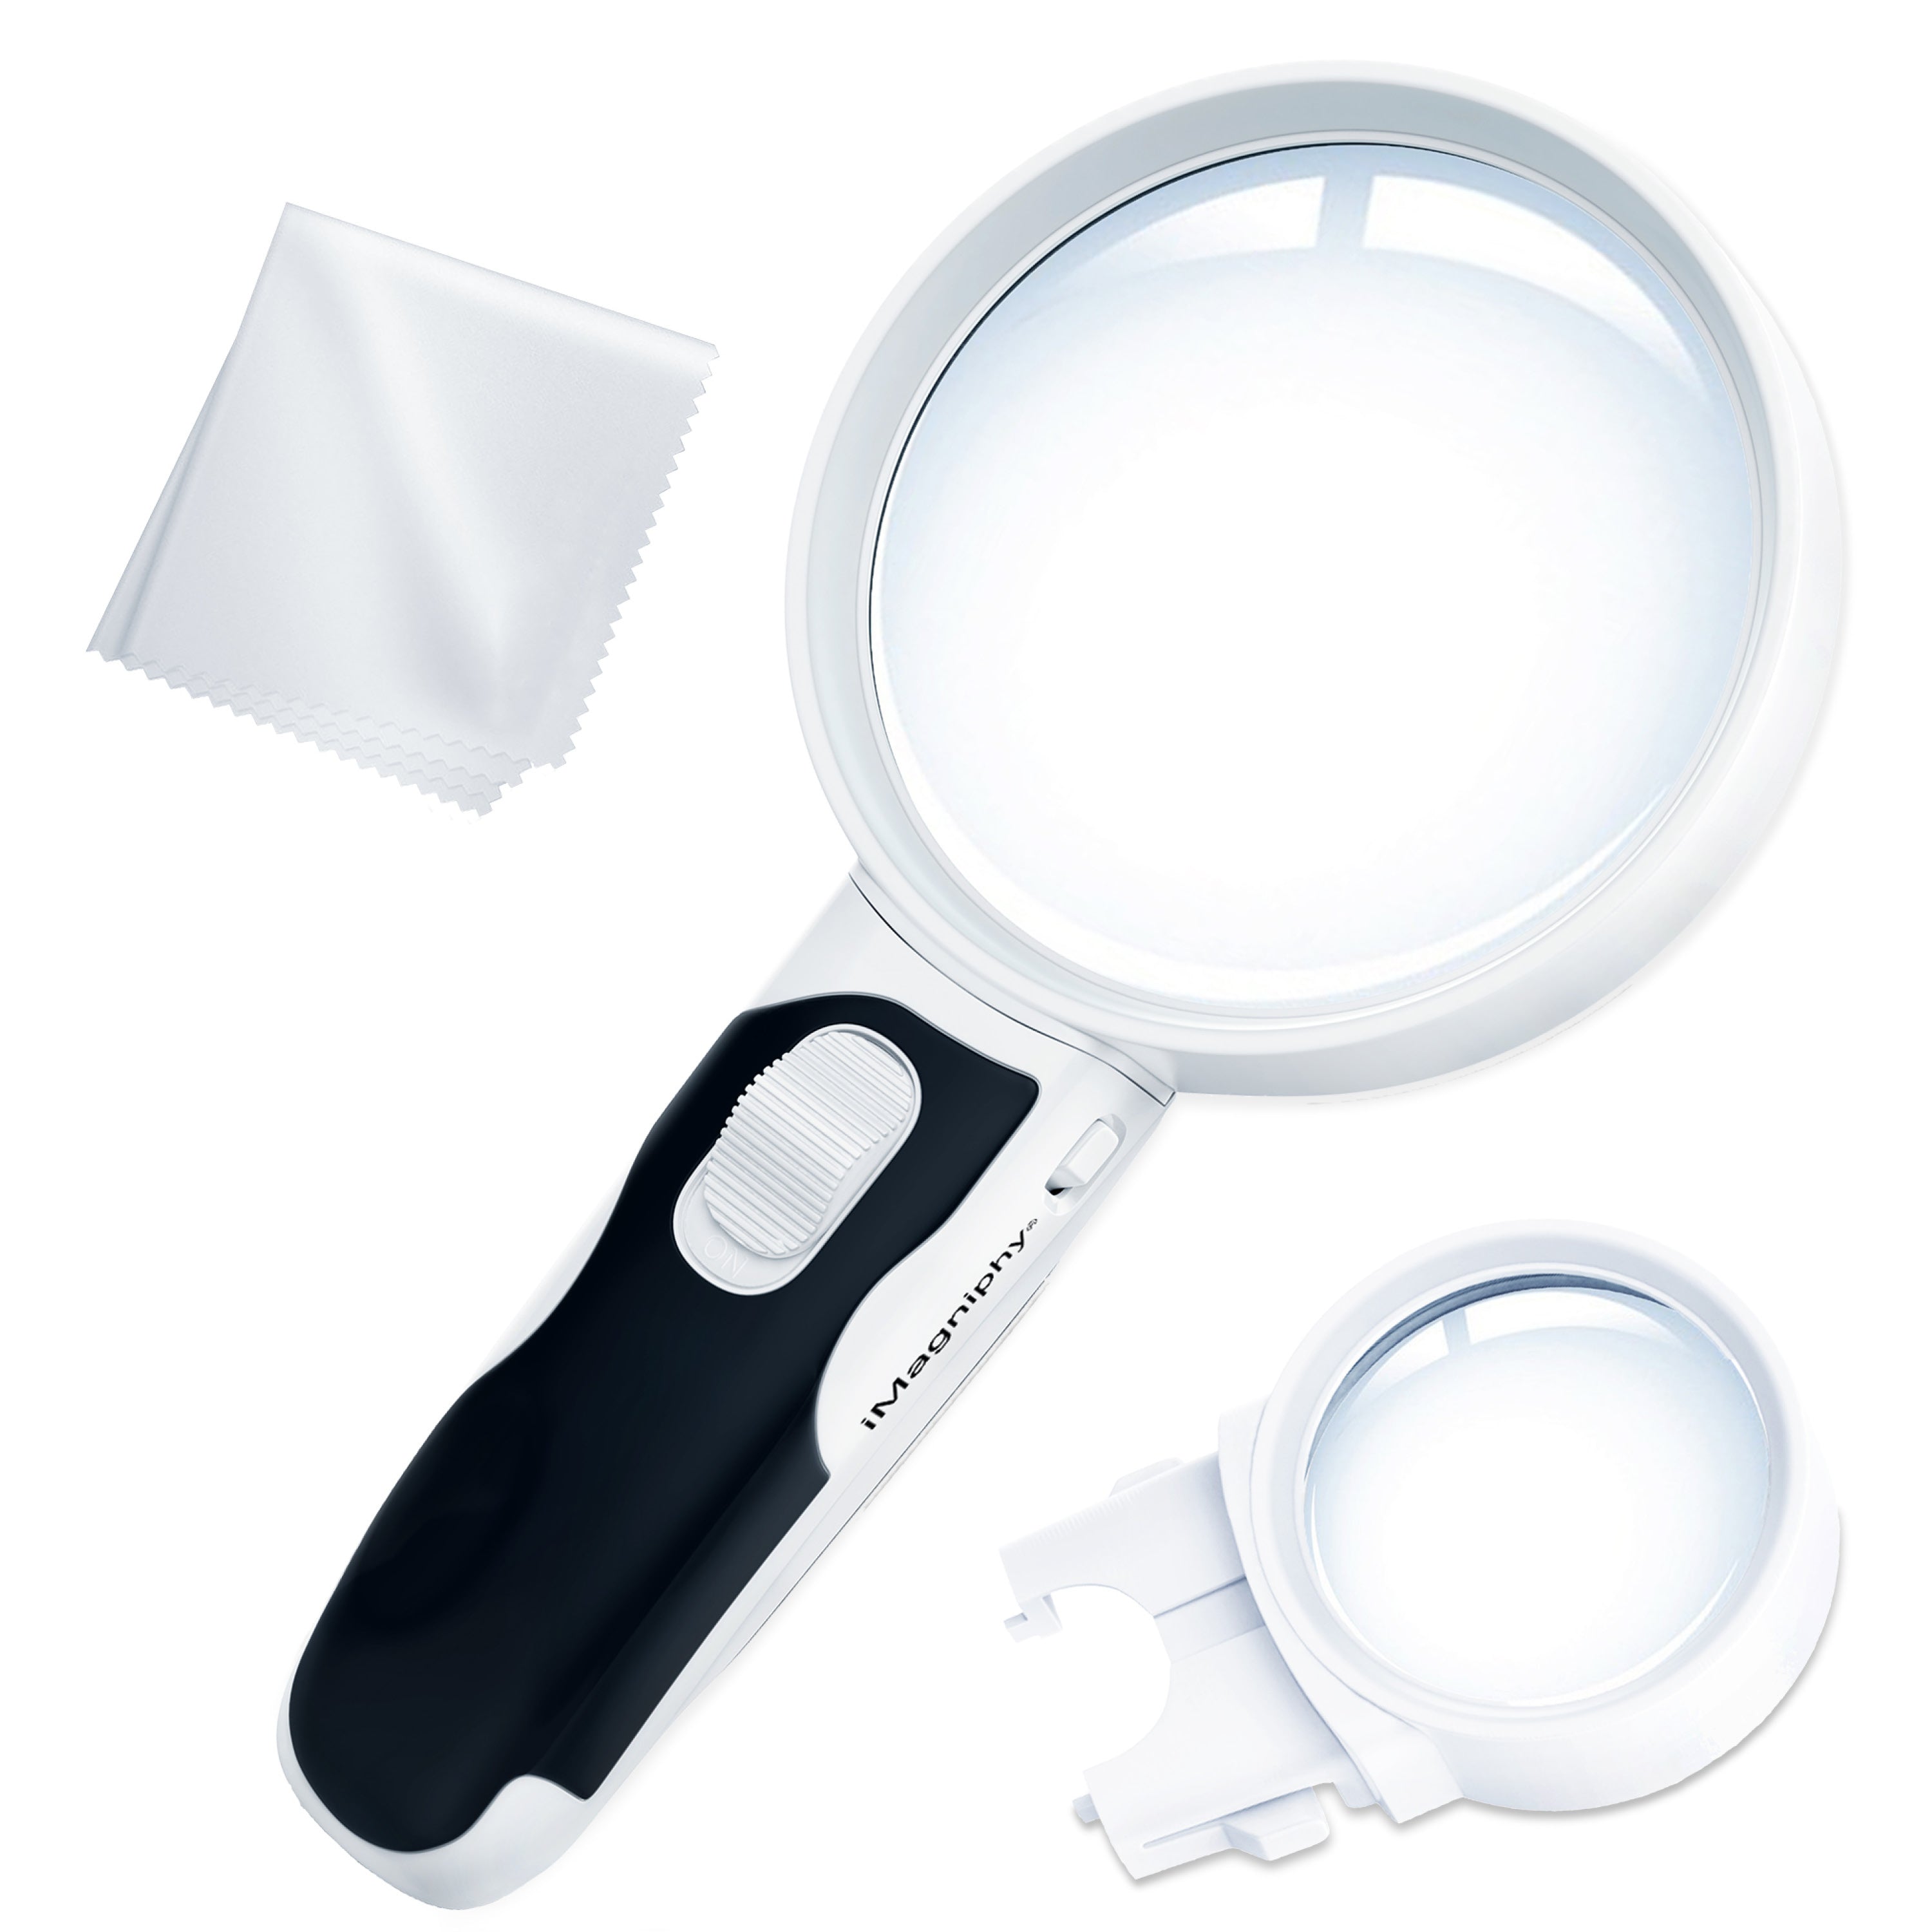 Magnifying Goggles Glass, 2 LED Lights, 5 Glass, Magnifier, and Adjustable  Work at Rs 400, Magnifying Lenses in Surat